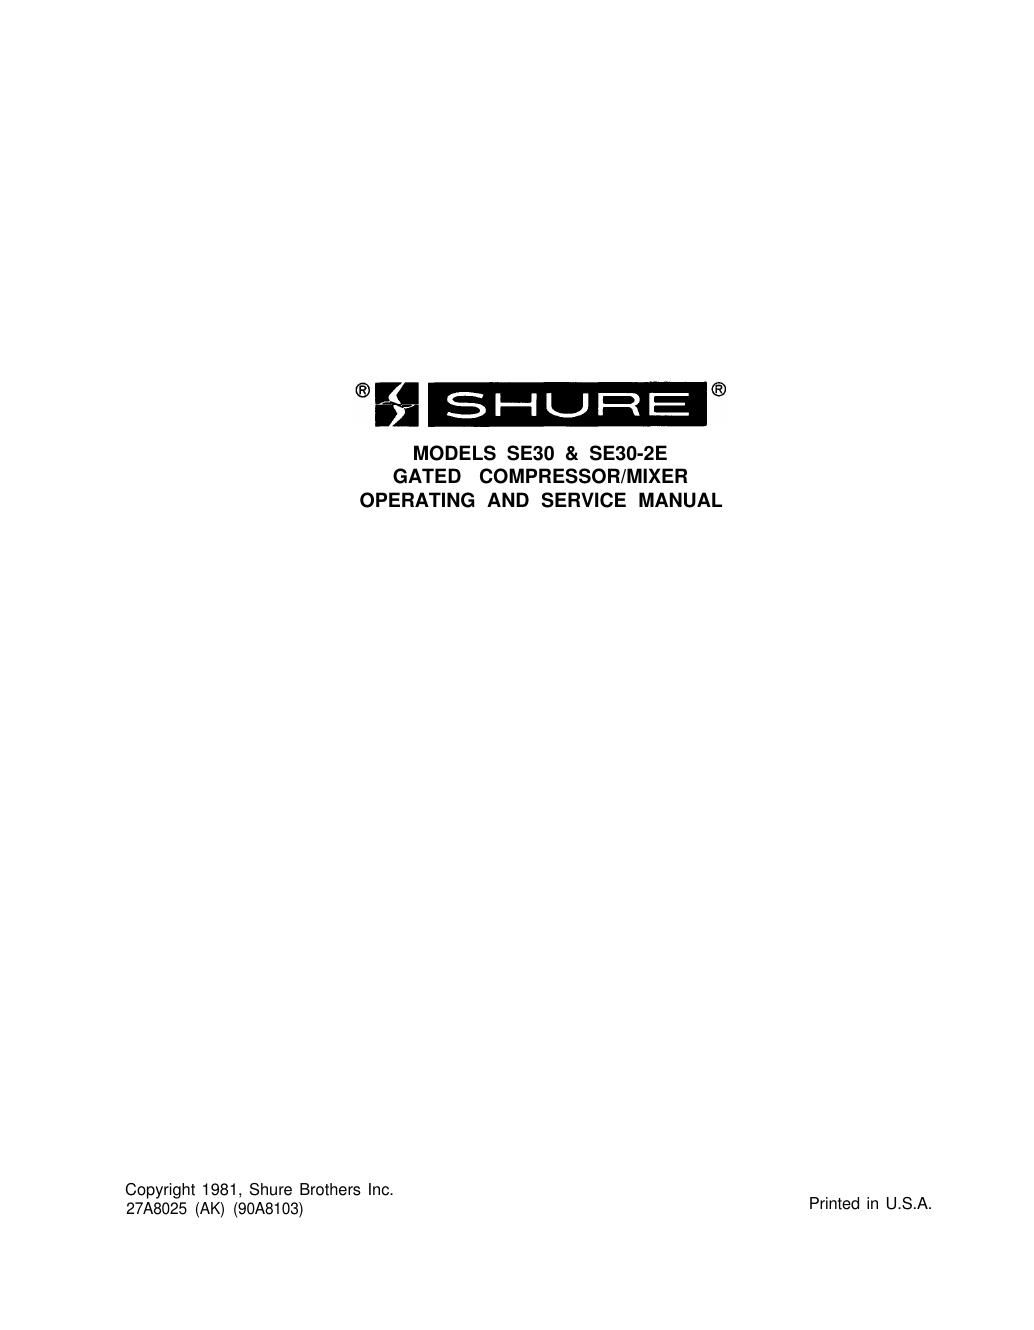 shure se30 owners manual